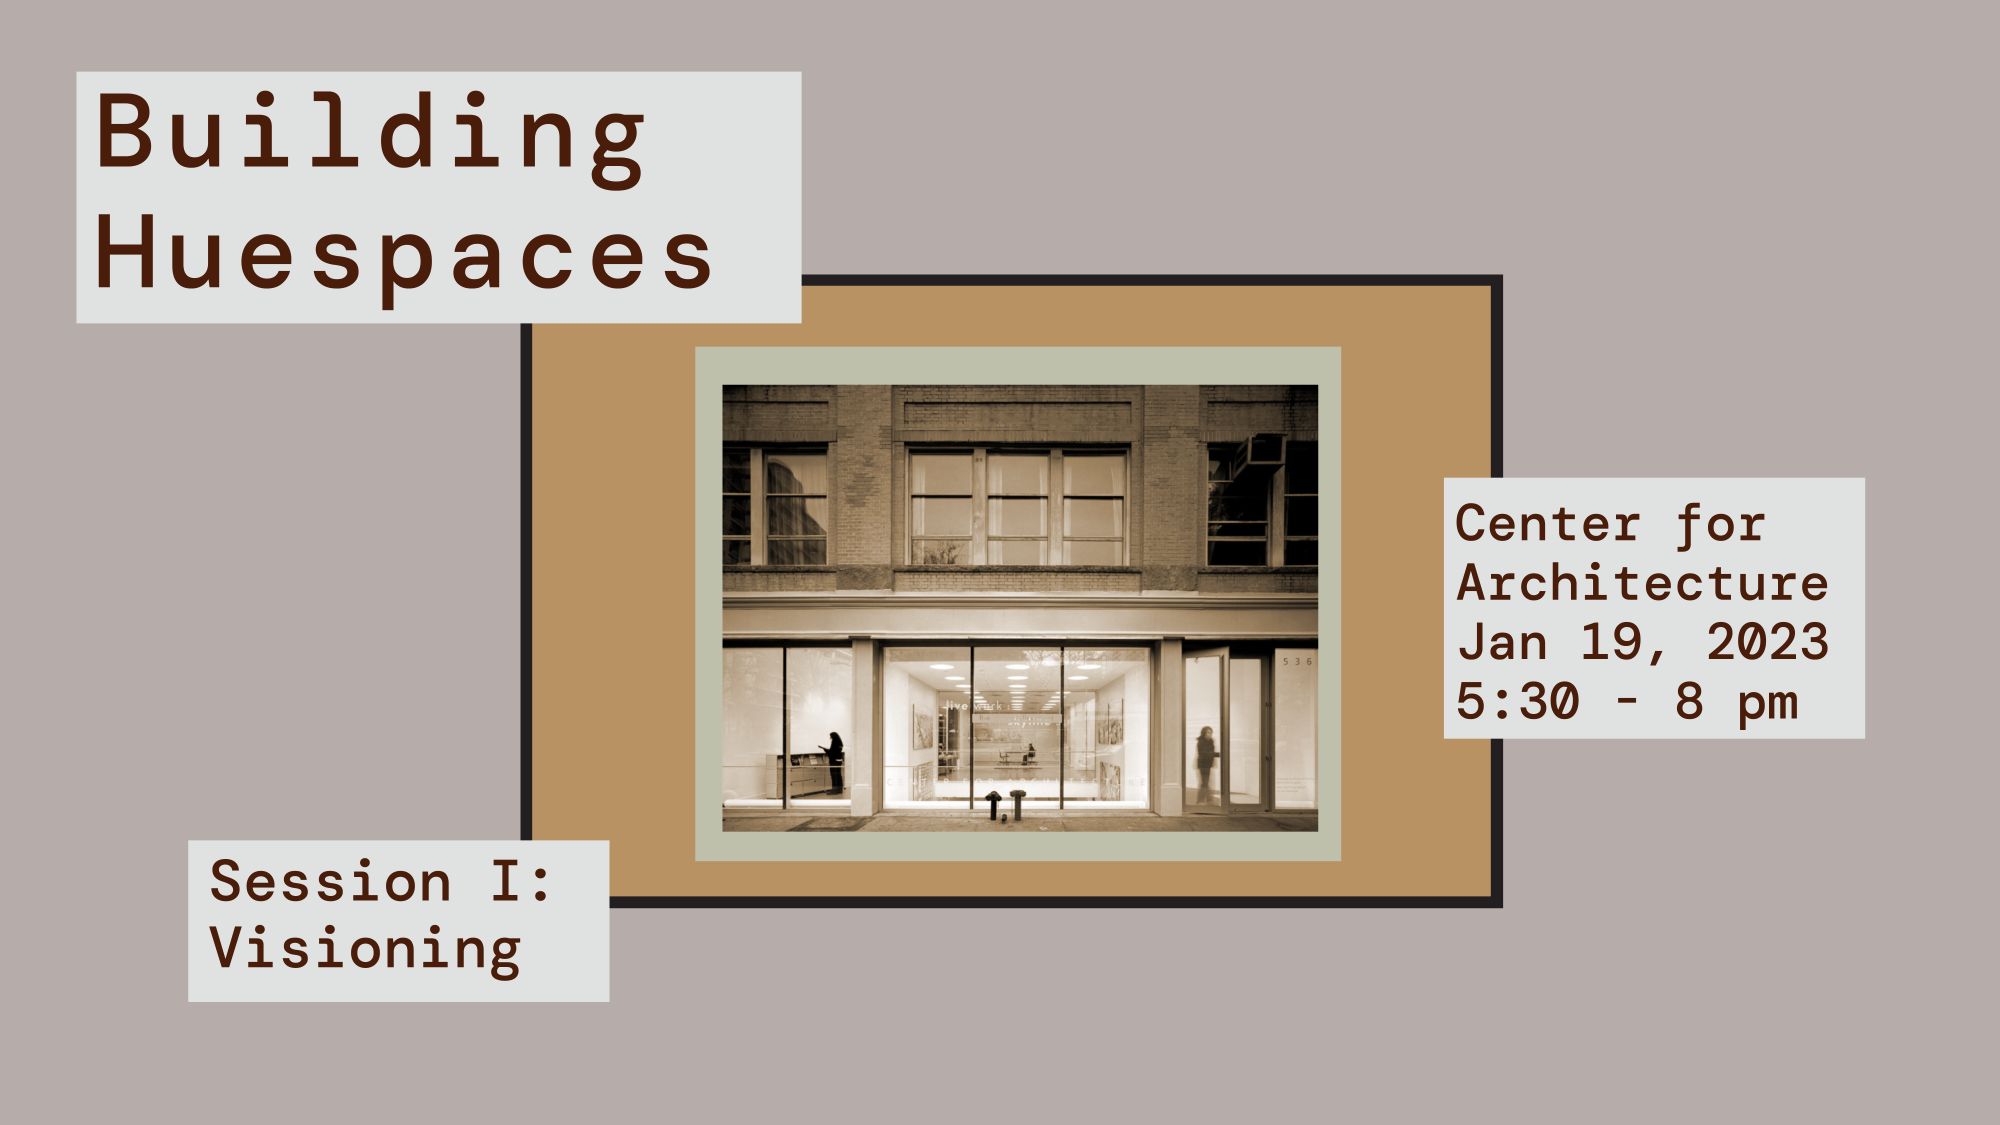 Building HueSpaces Session 1: Visioning will be held at the Center for Architecture on January 19th, 2023 at 5:30pm.